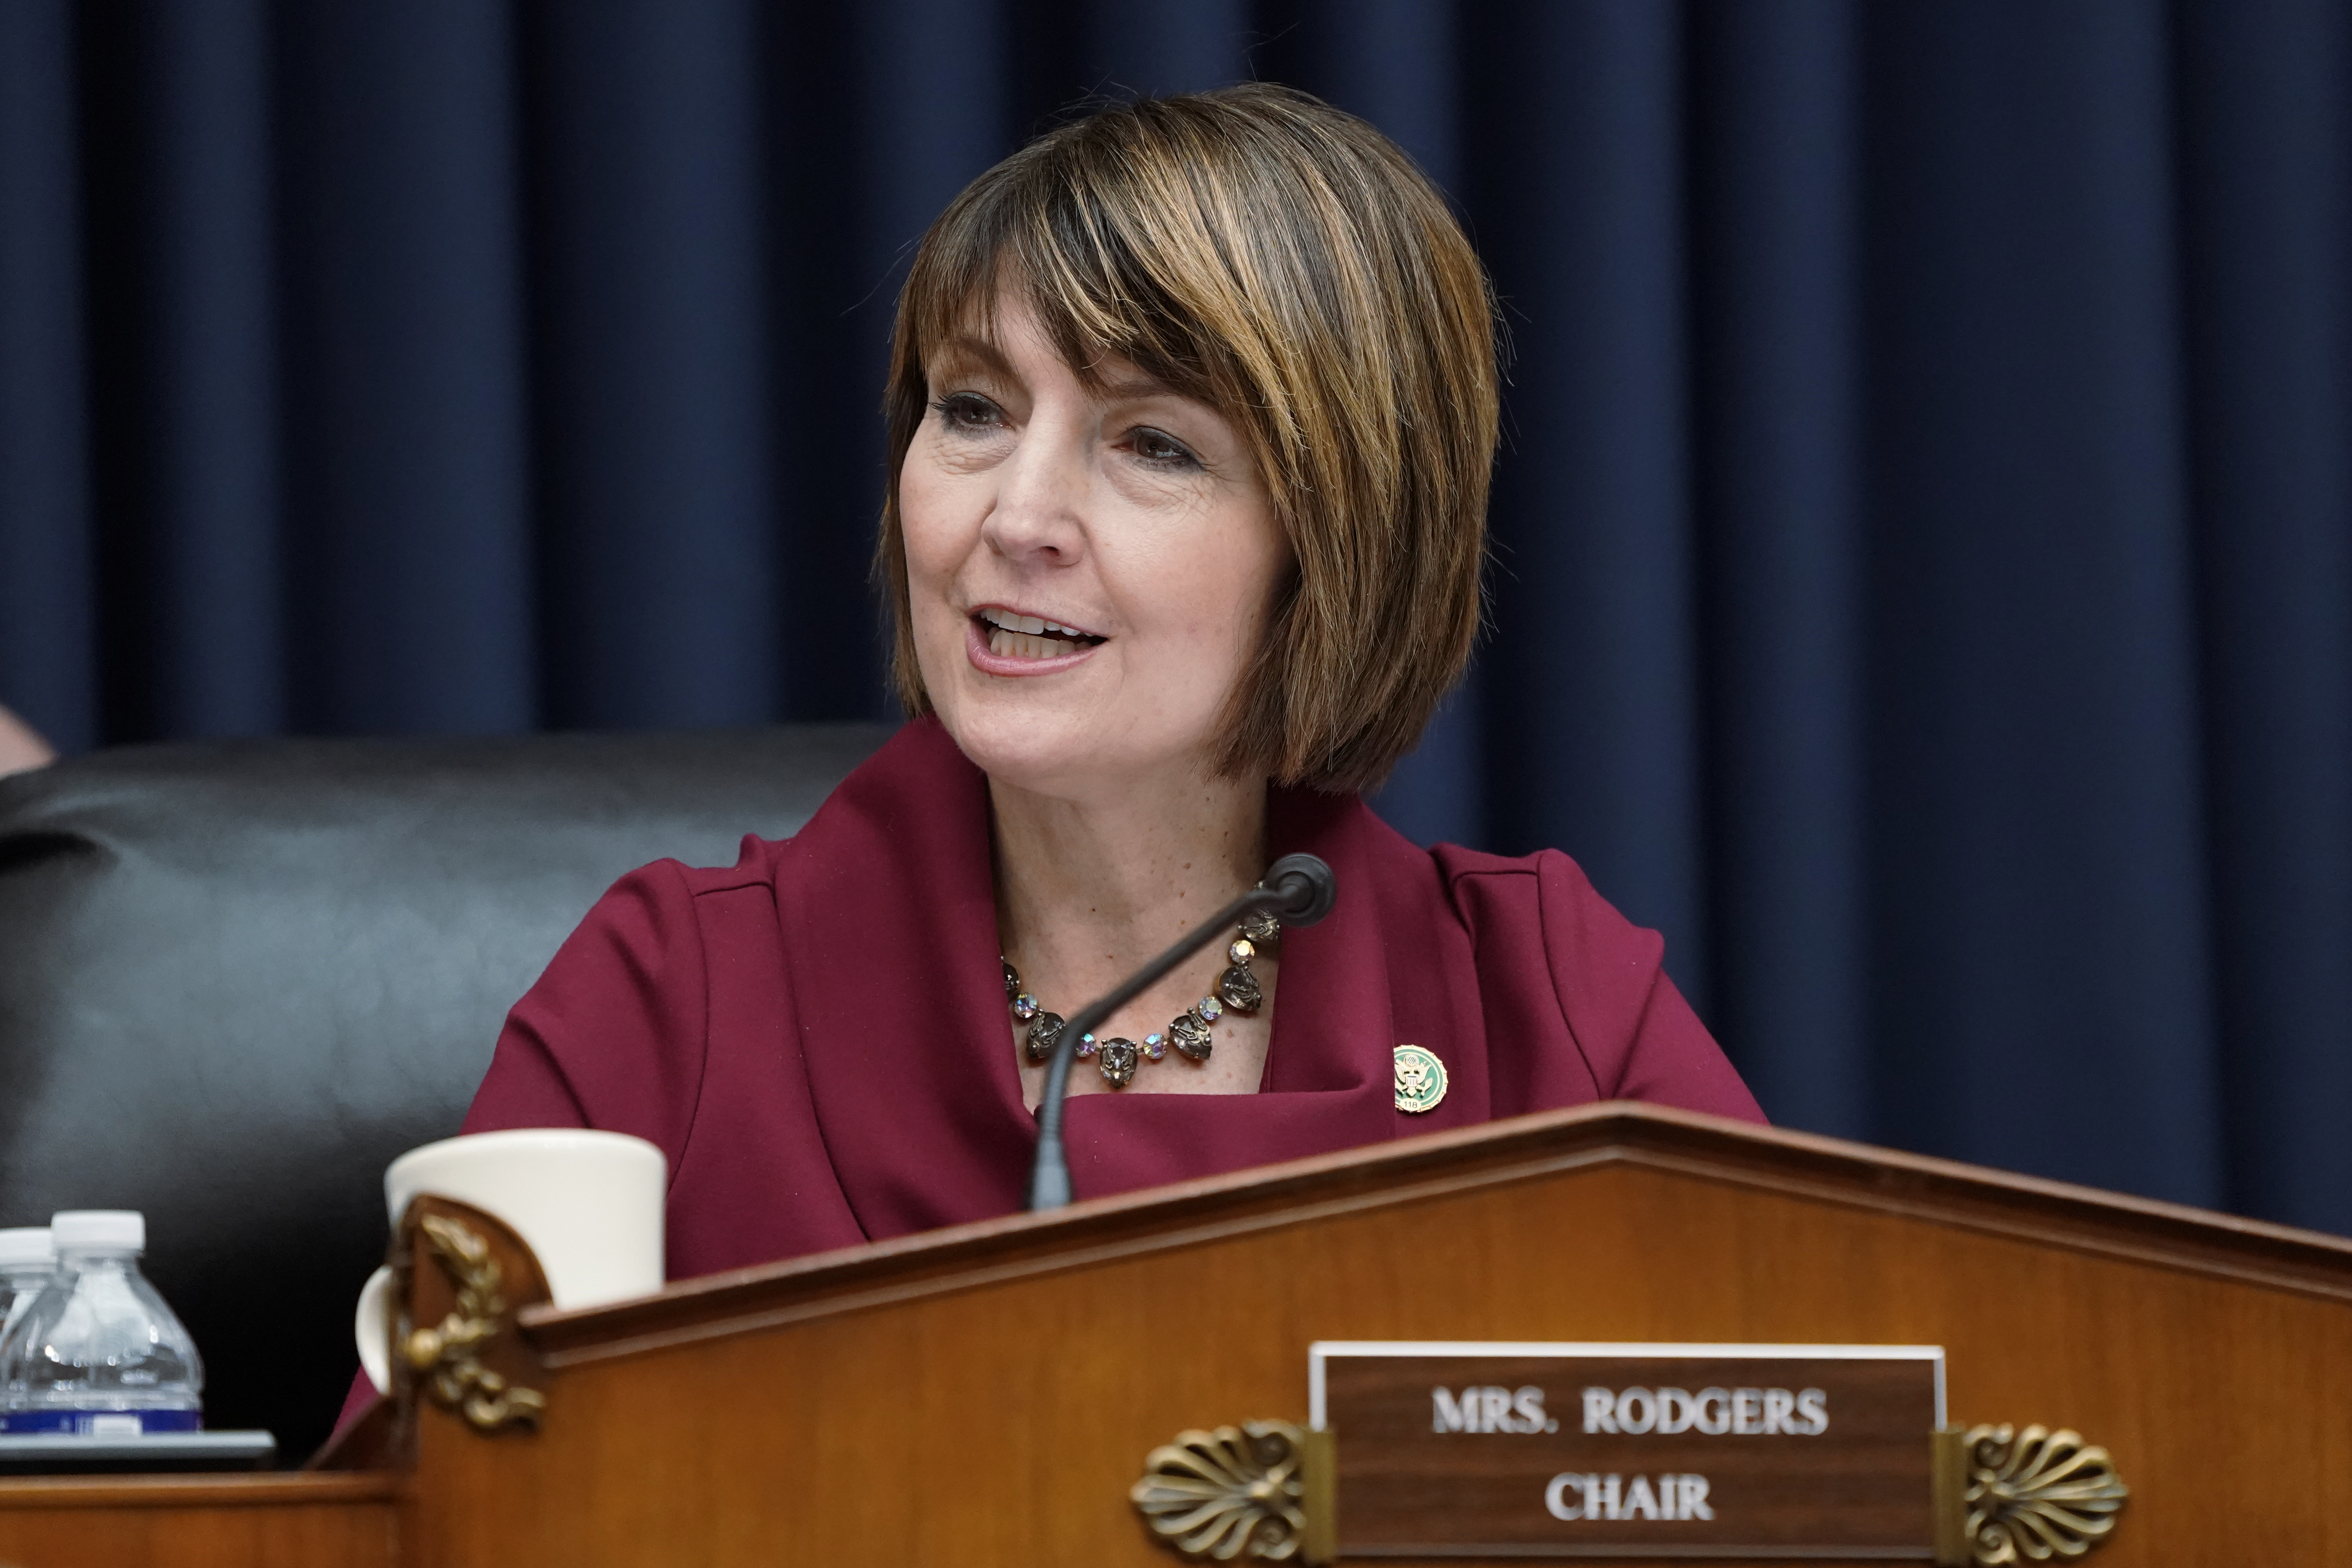 Cathy McMorris Rodgers sits behind a brown podium before a blue curtain in a maroon jacket in Washington D.C.